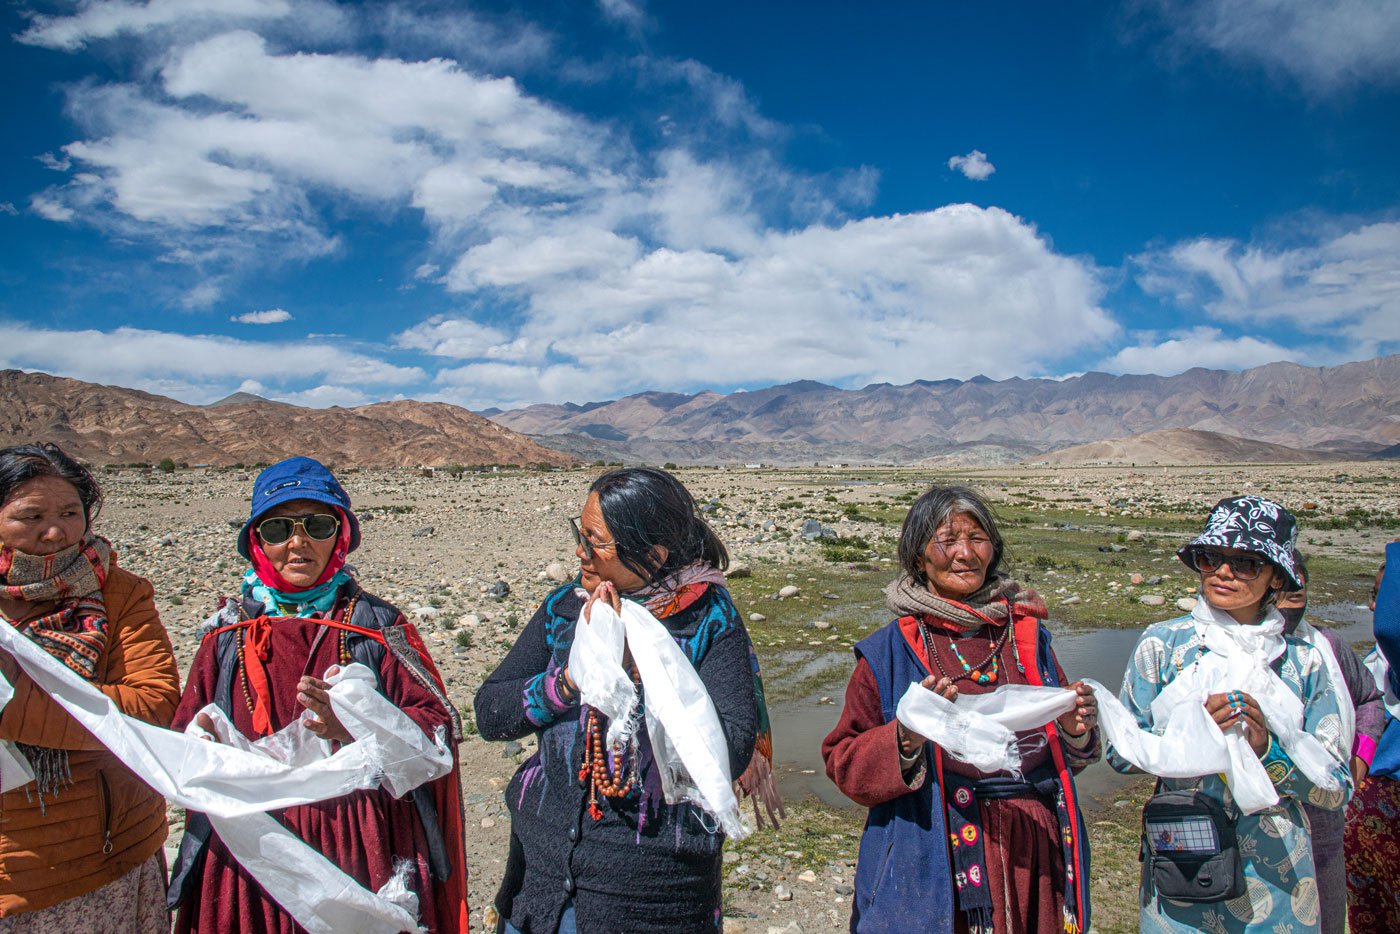 The procession heads towards the local Gompa in Punguk village where residents are waiting to welcome them with white scarves